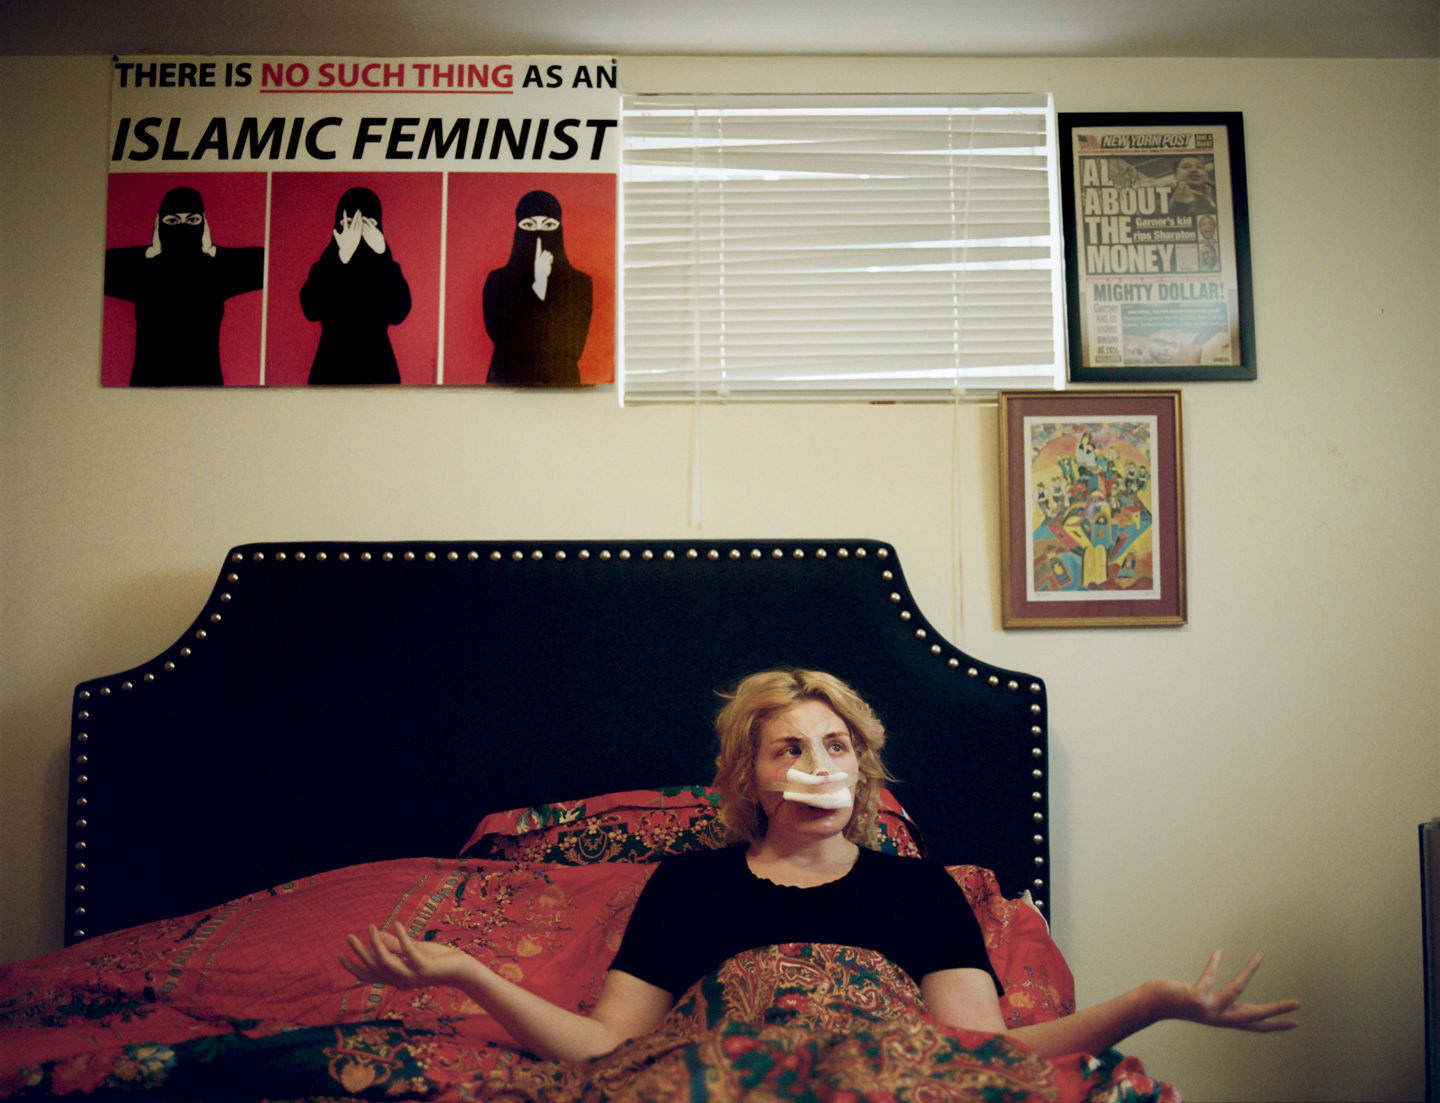 Laura Loomer, an anti-Islam activist, is unique in her role in the extreme right because she is Jewish. After being continuously trolled by David Duke and others, which included pictures posted of her photoshopped in to gas chambers, she decided to get a nose job so she could further her own agenda without appearing so Jewish. Her antiIslam activism drives islamophobia in the USA, and she also plays the important role of victim within the far right twittersphere. Lauren Southern and others enjoy taking pot shots at her, and Pamella Geller was quick to distance herself from the toxic Loomer as well. 